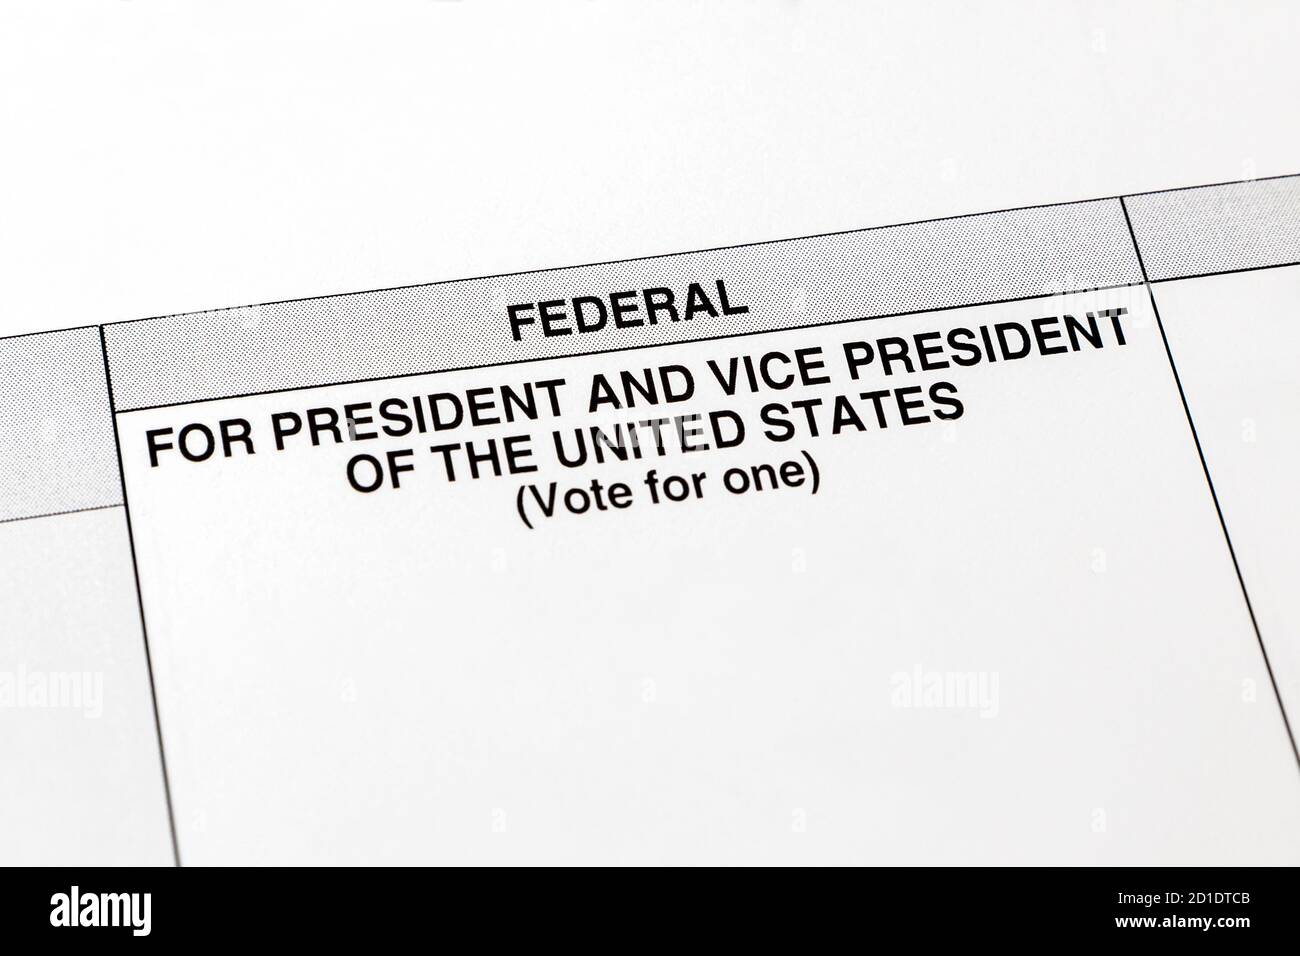 Voting ballot for president of United States of America. Concept of absentee and vote by mail during Covid-19 coronavirus pandemic. Stock Photo